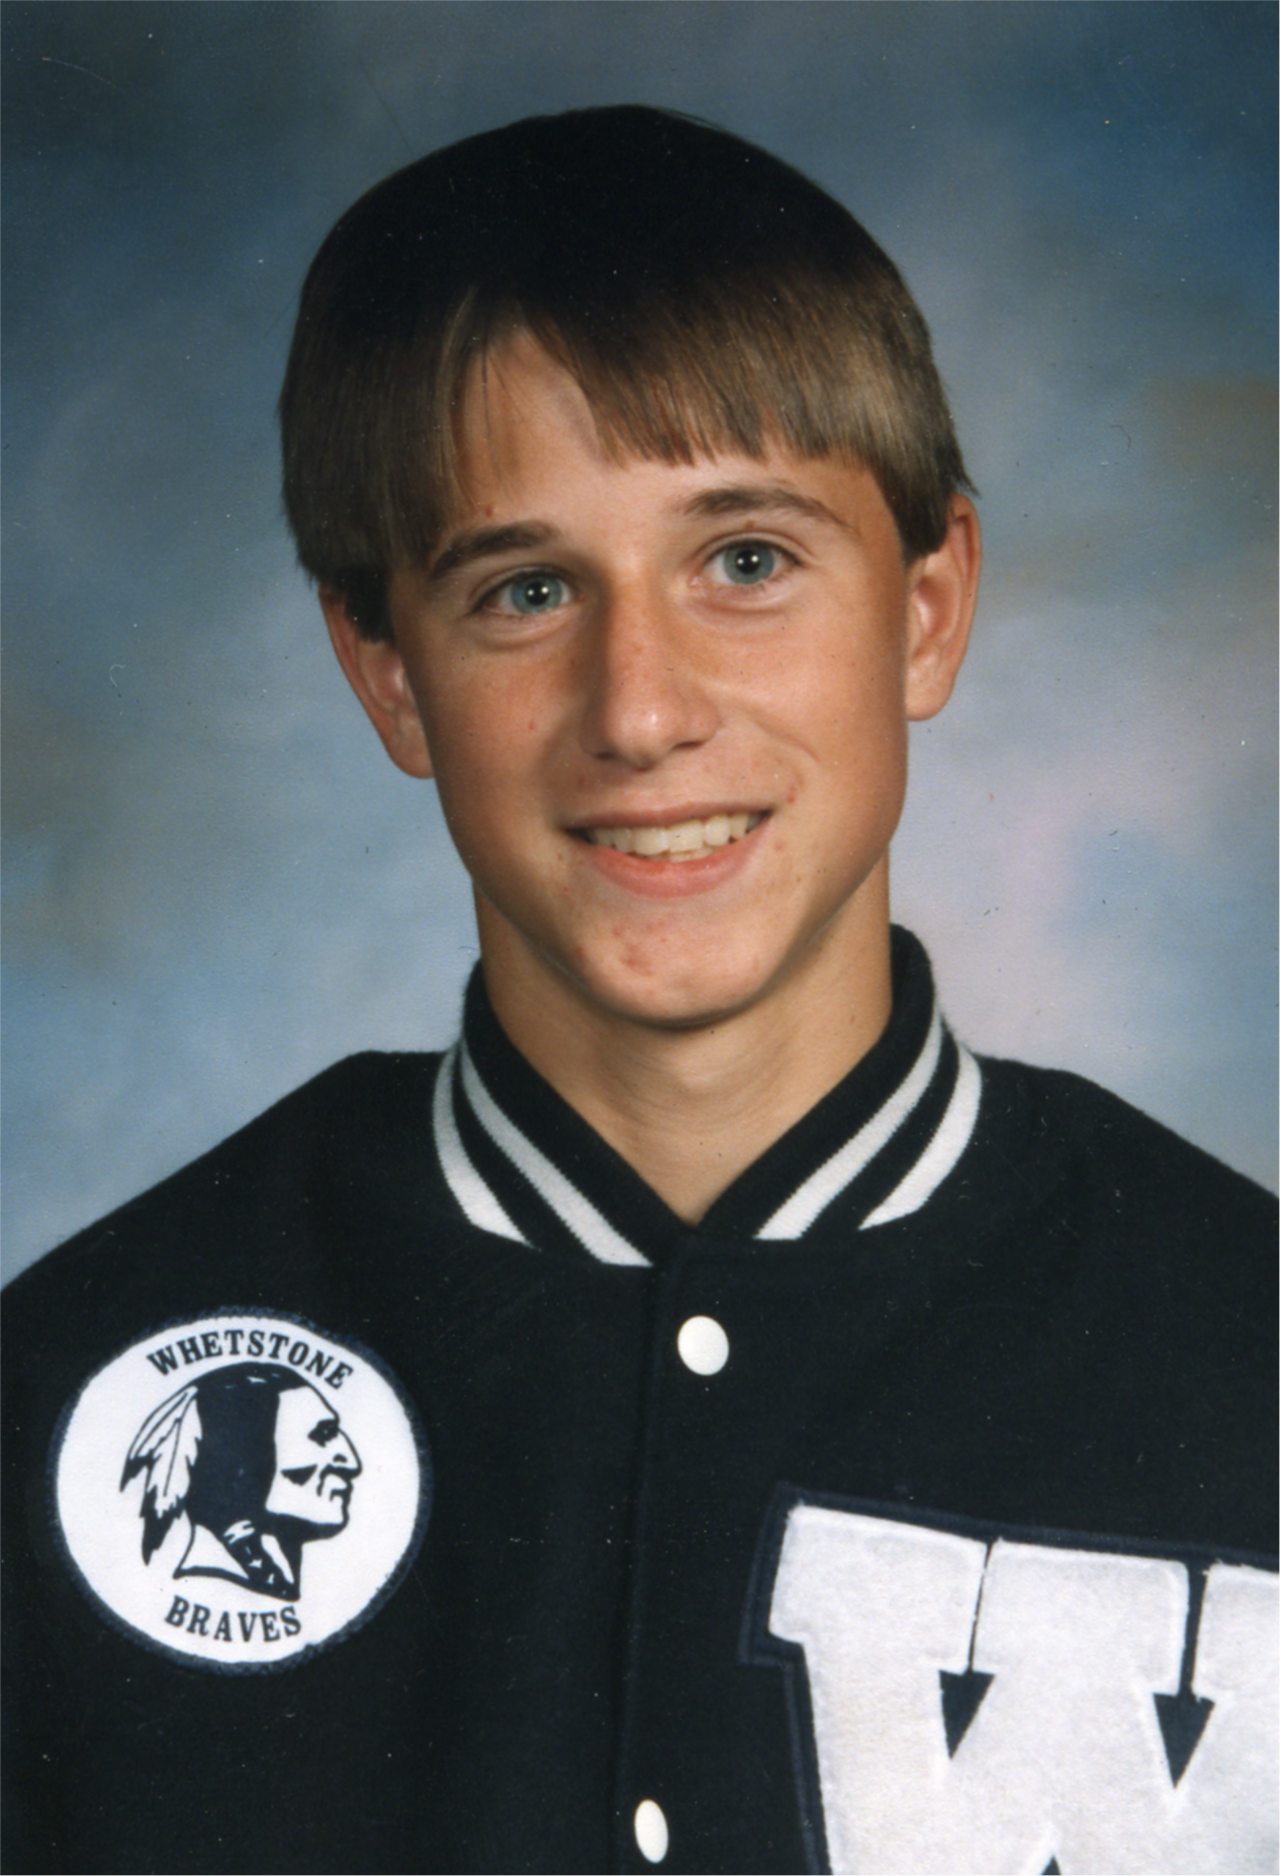 Caucasian boy with a blue and white letterman jacket on.  Grey and blue background.  